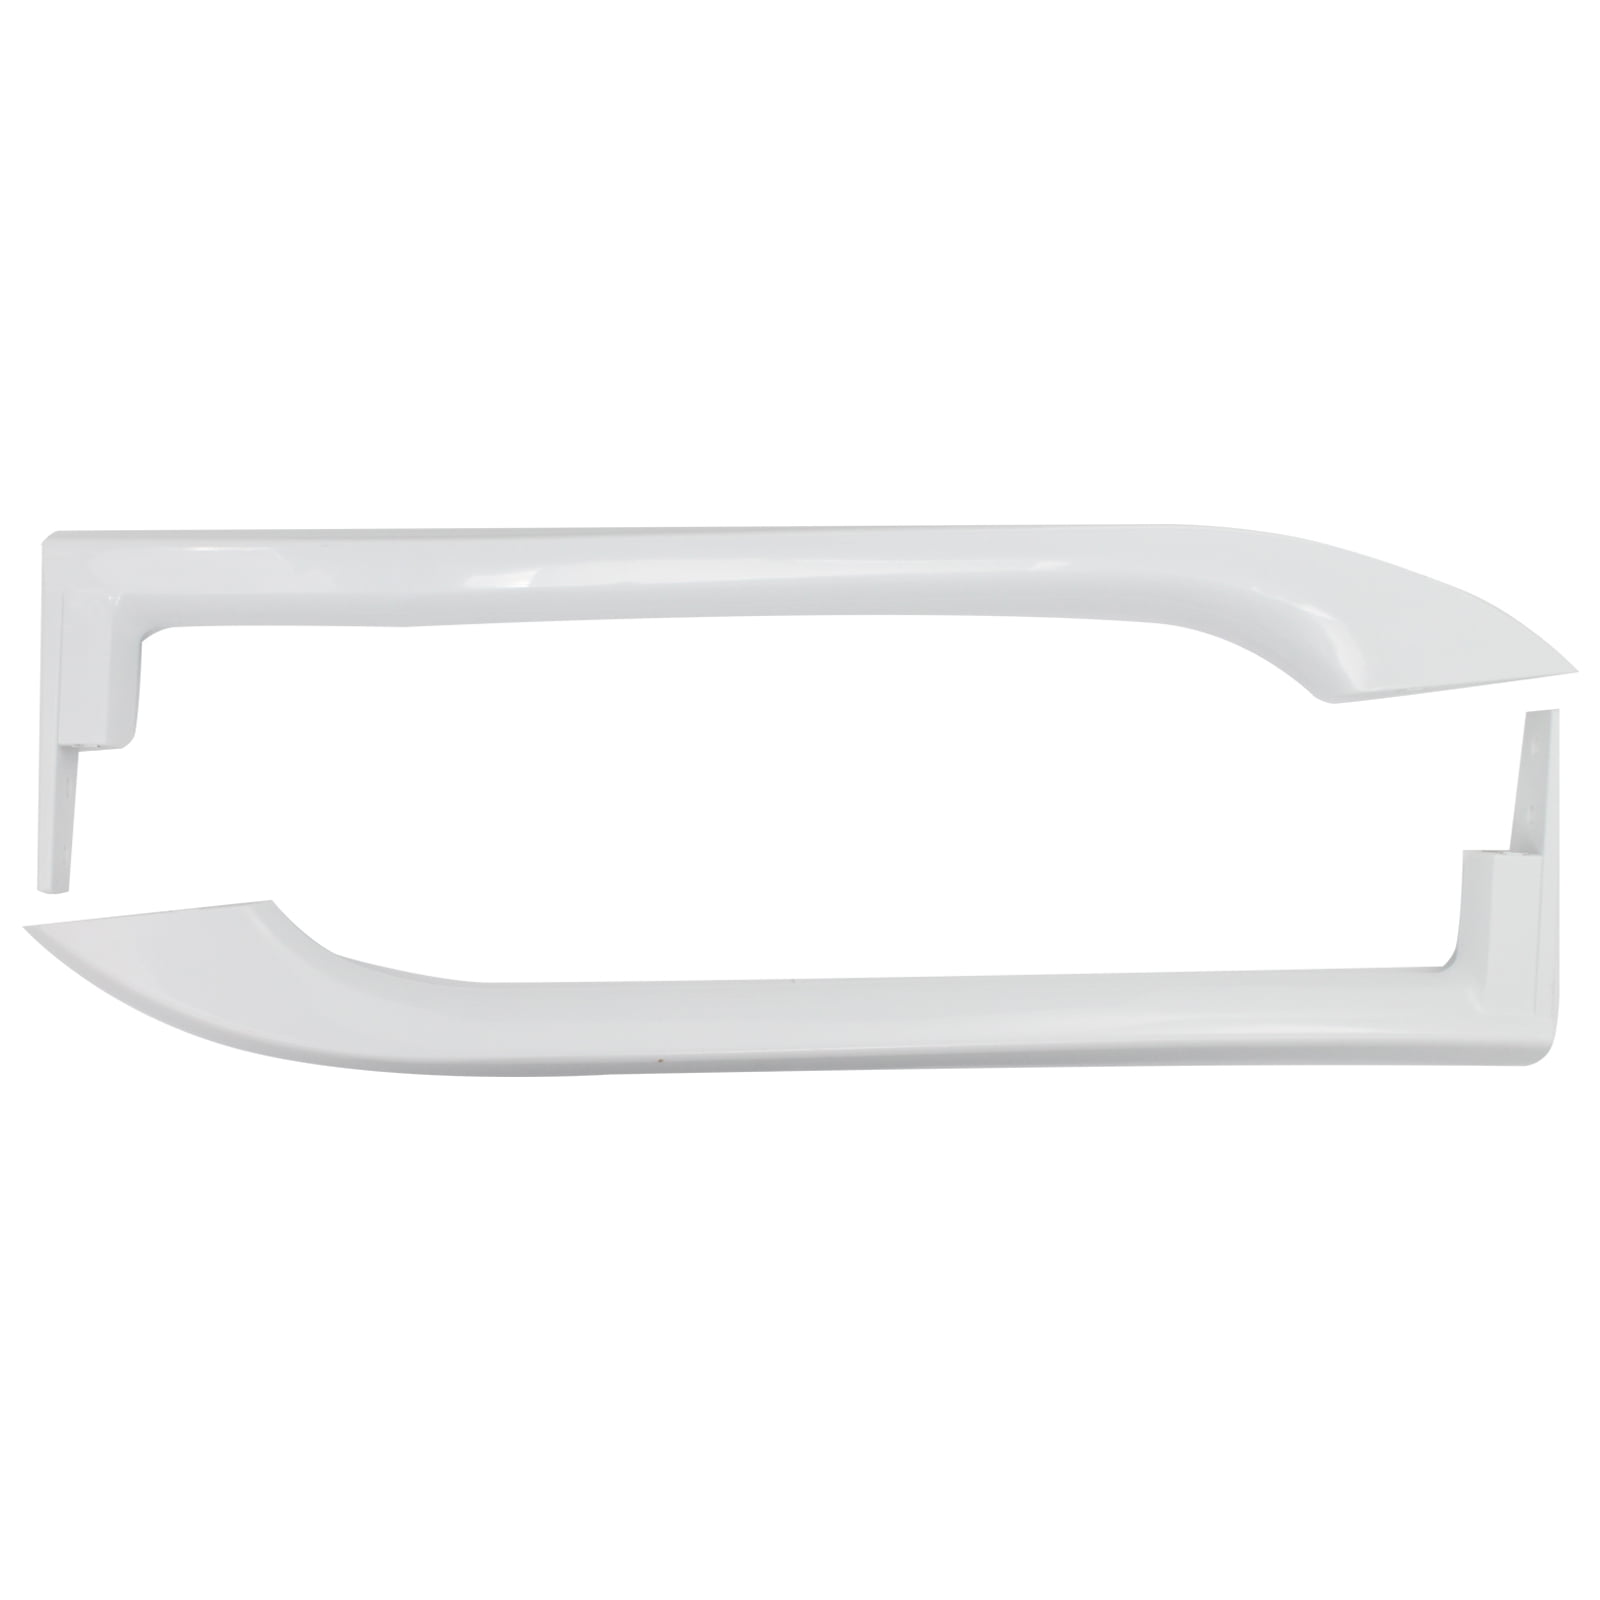 set of Two for sale online 5304486359 Electrolux Frigidaire Refrigerator White Handle 